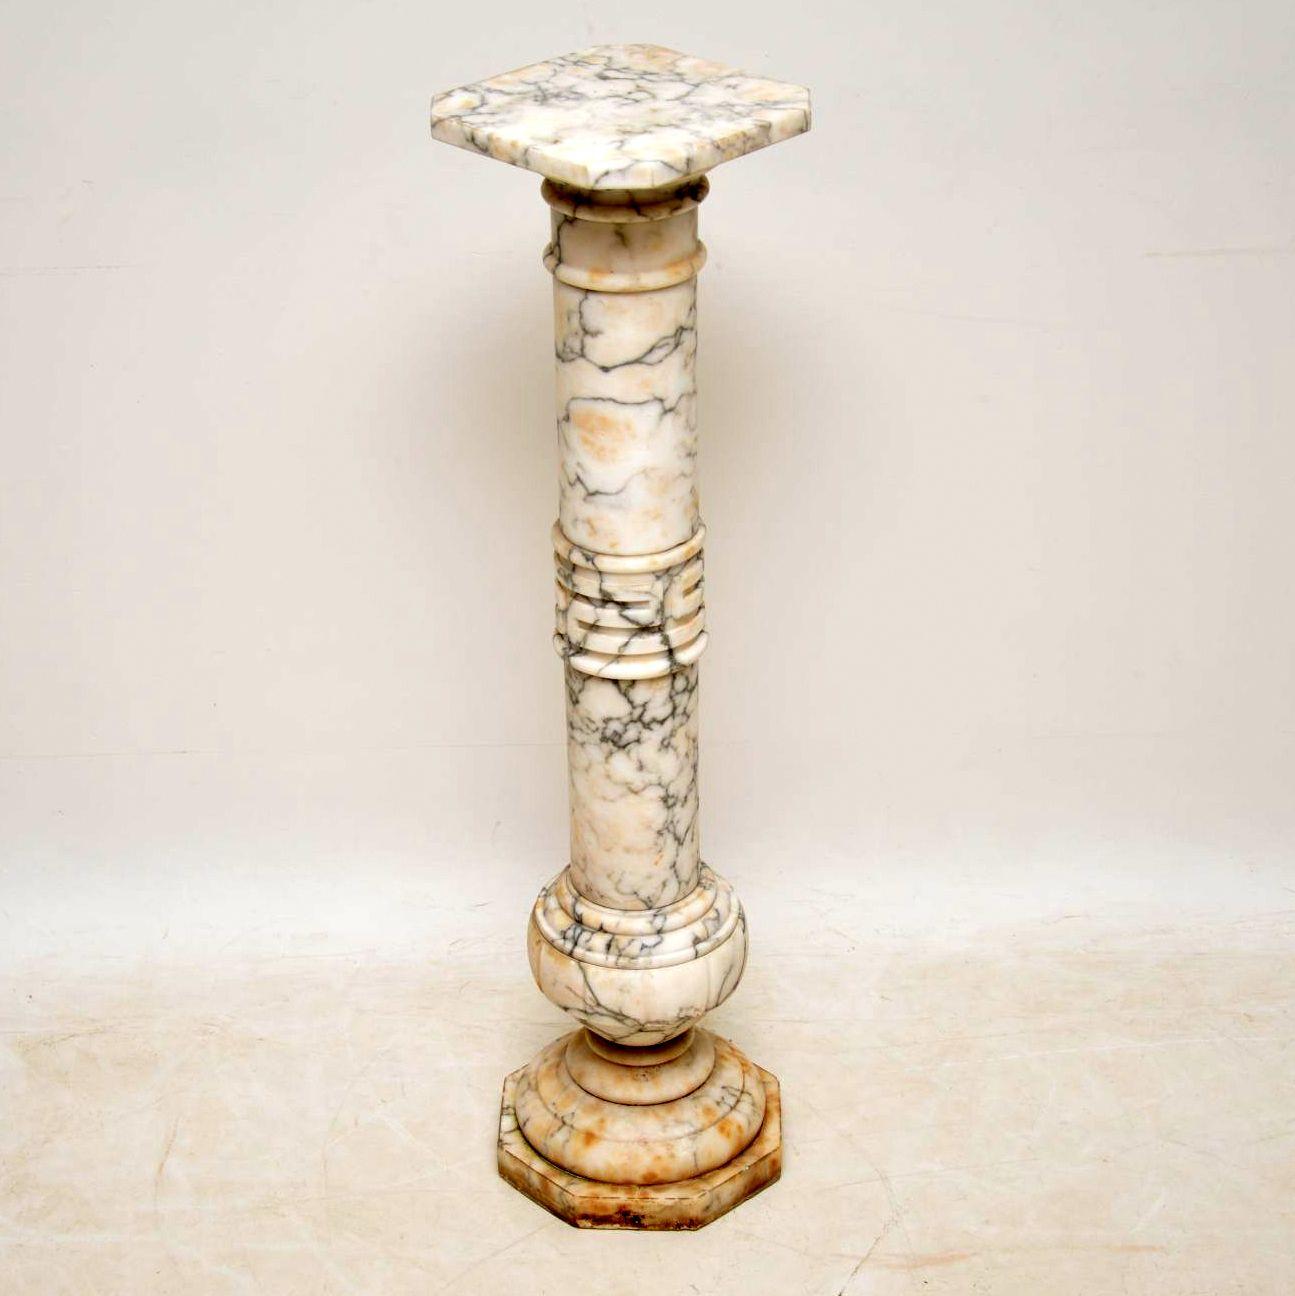 Antique Italian alabaster column in good original condition and with some natural wear showing on the surface in places, but no damage. We haven’t tried to clean this up at all, because we quite like it showing more character. I believe this is